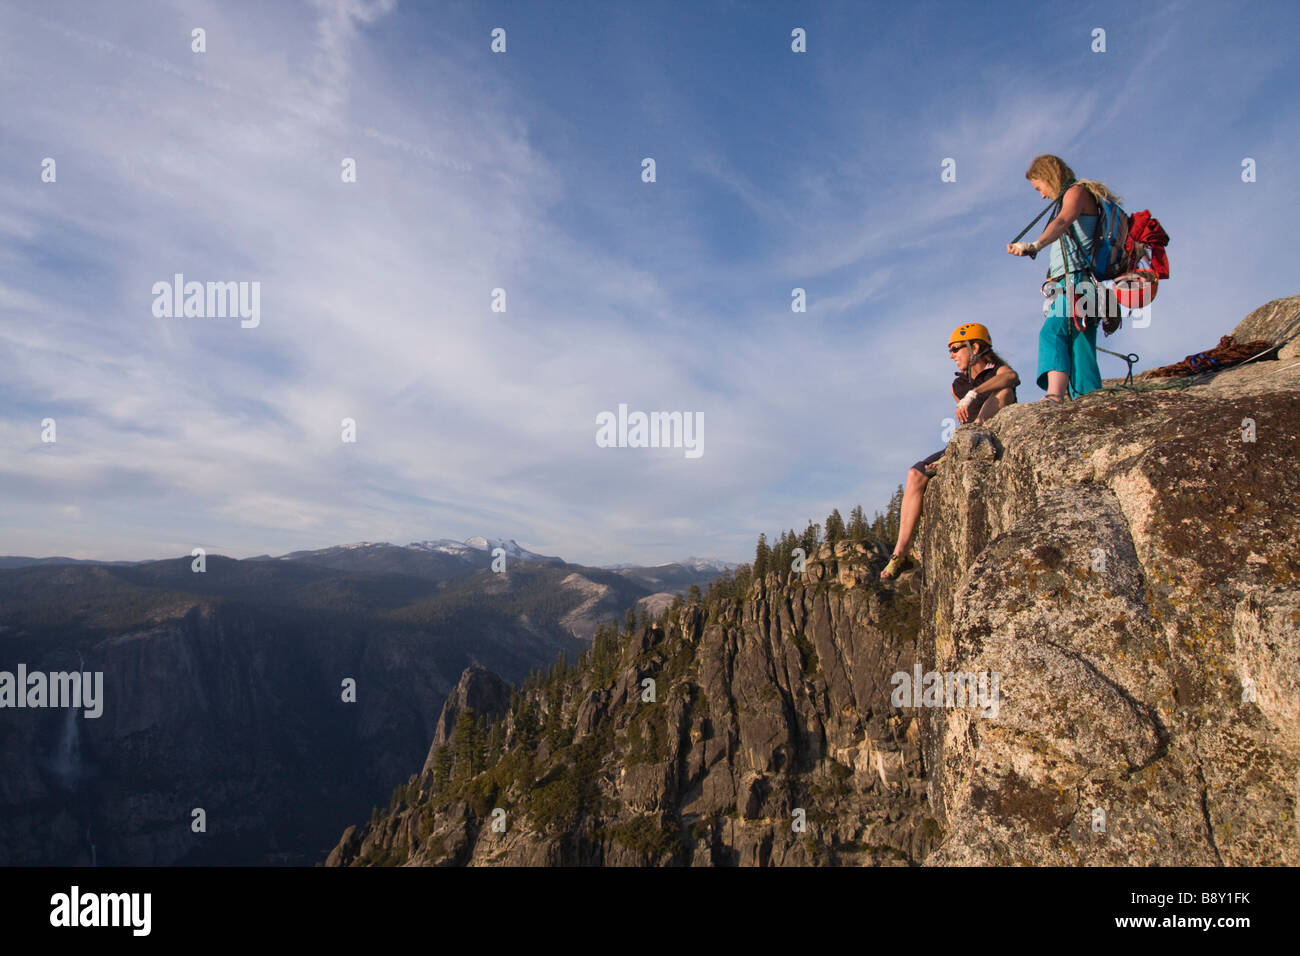 Low angle view of two female rock climbers on an overhanging cliff, Taft Point, Yosemite National Park, California, USA Stock Photo